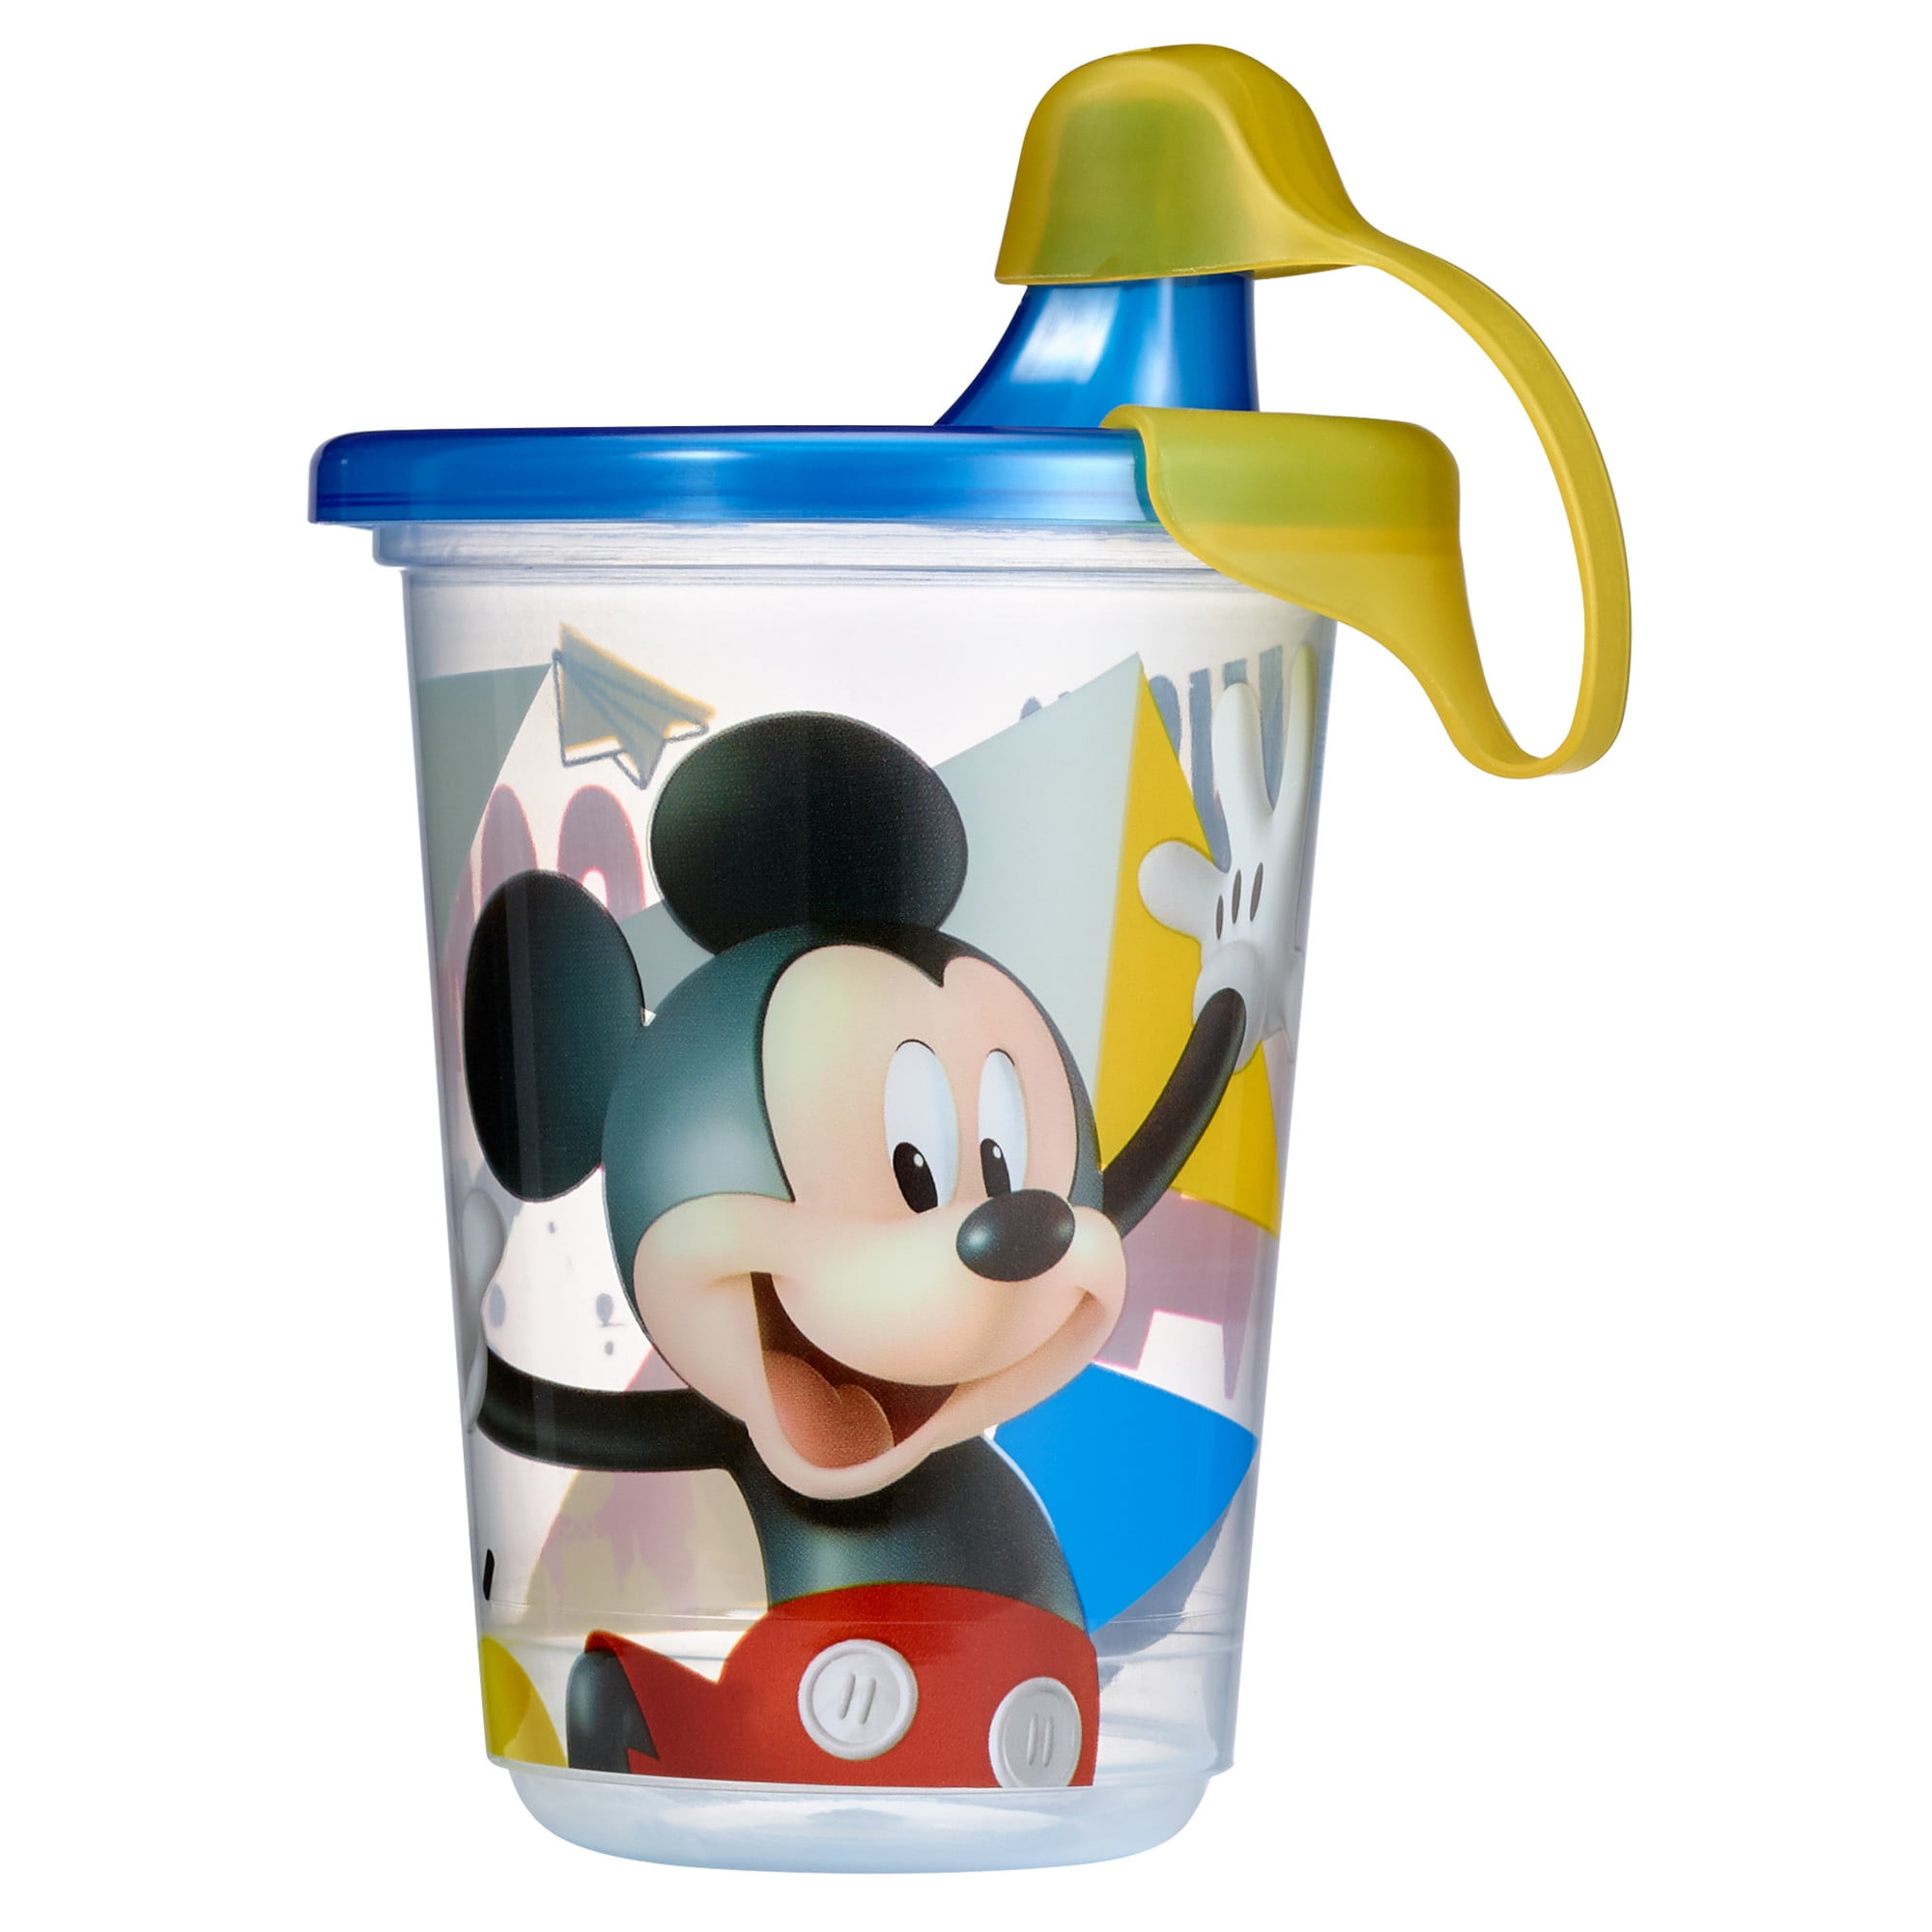 Disney Store: Kids' Character Cups Only $2.99 (Regularly $8) & More Deals